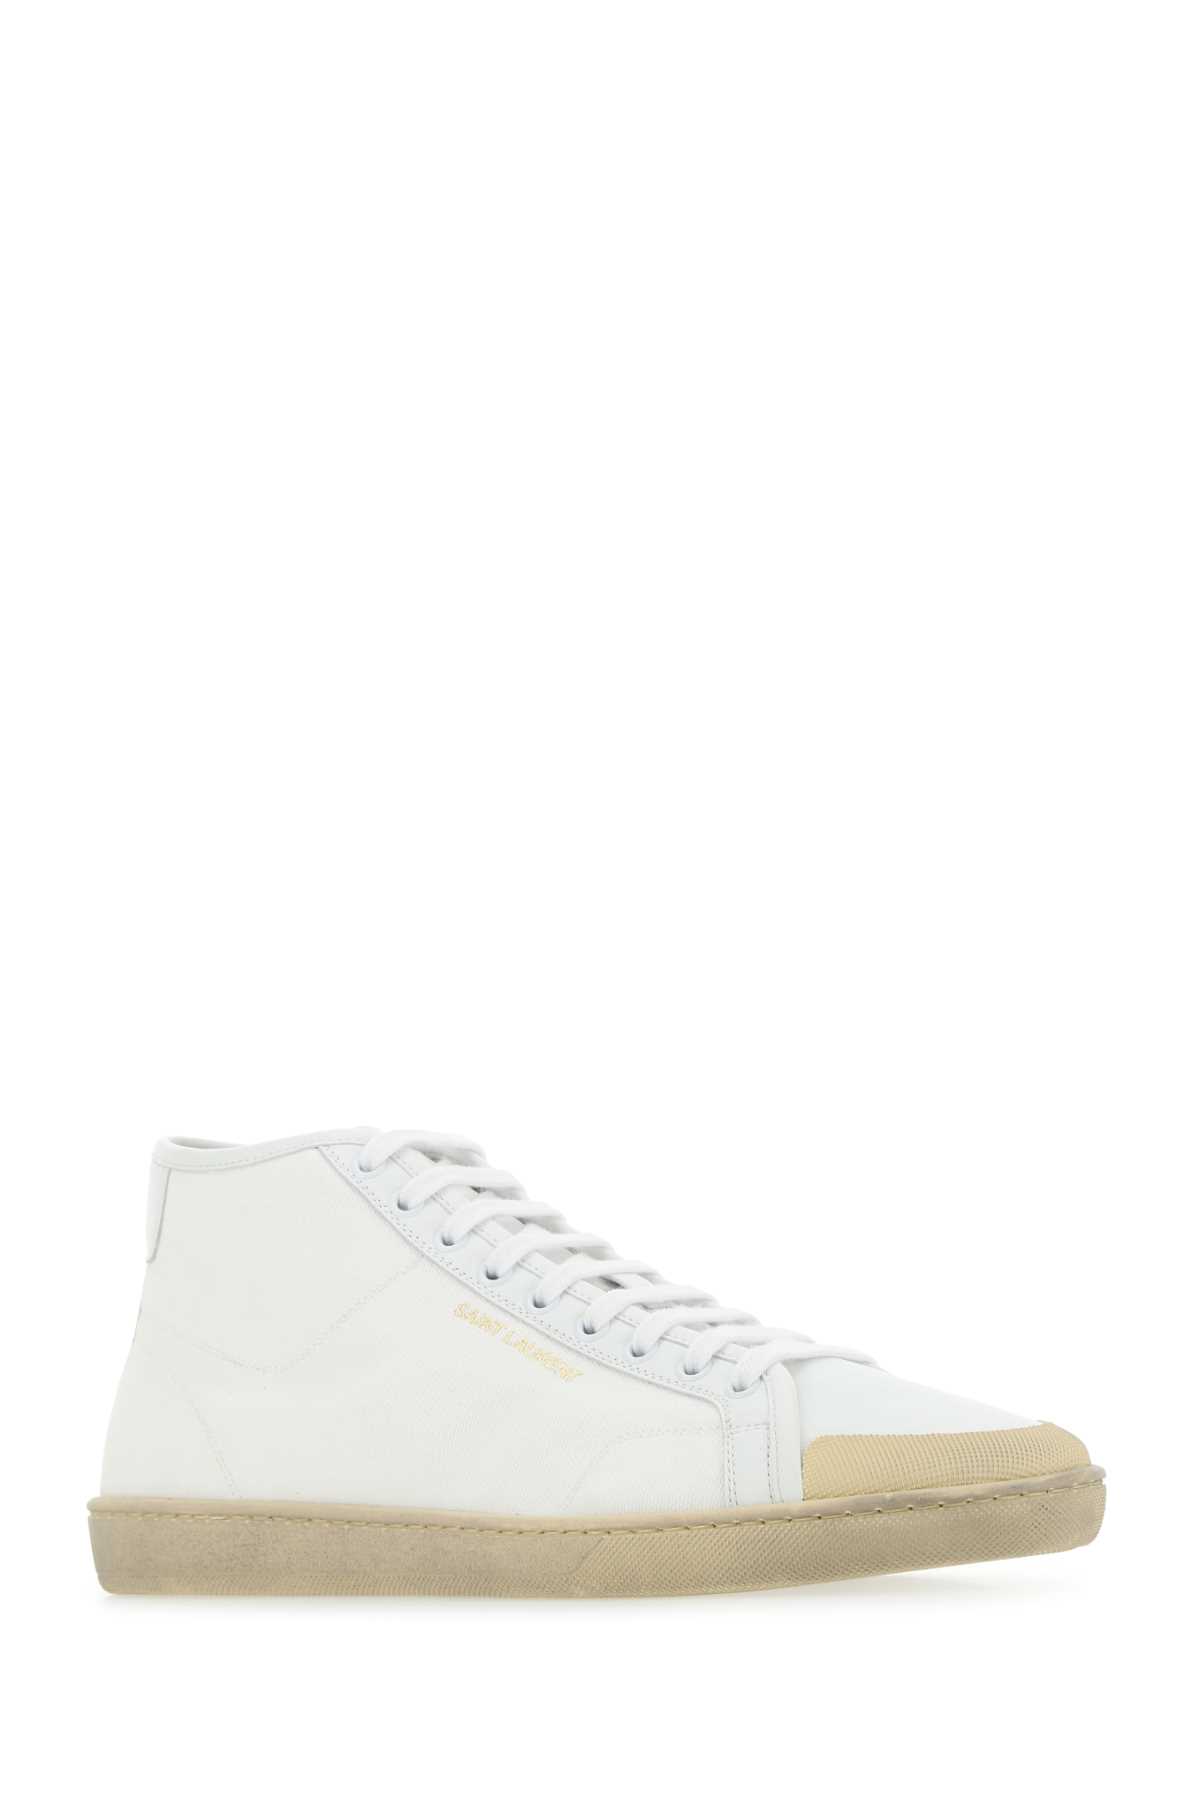 Saint Laurent White Canvas And Leather Court Classic Sl/39 Trainers In 9026